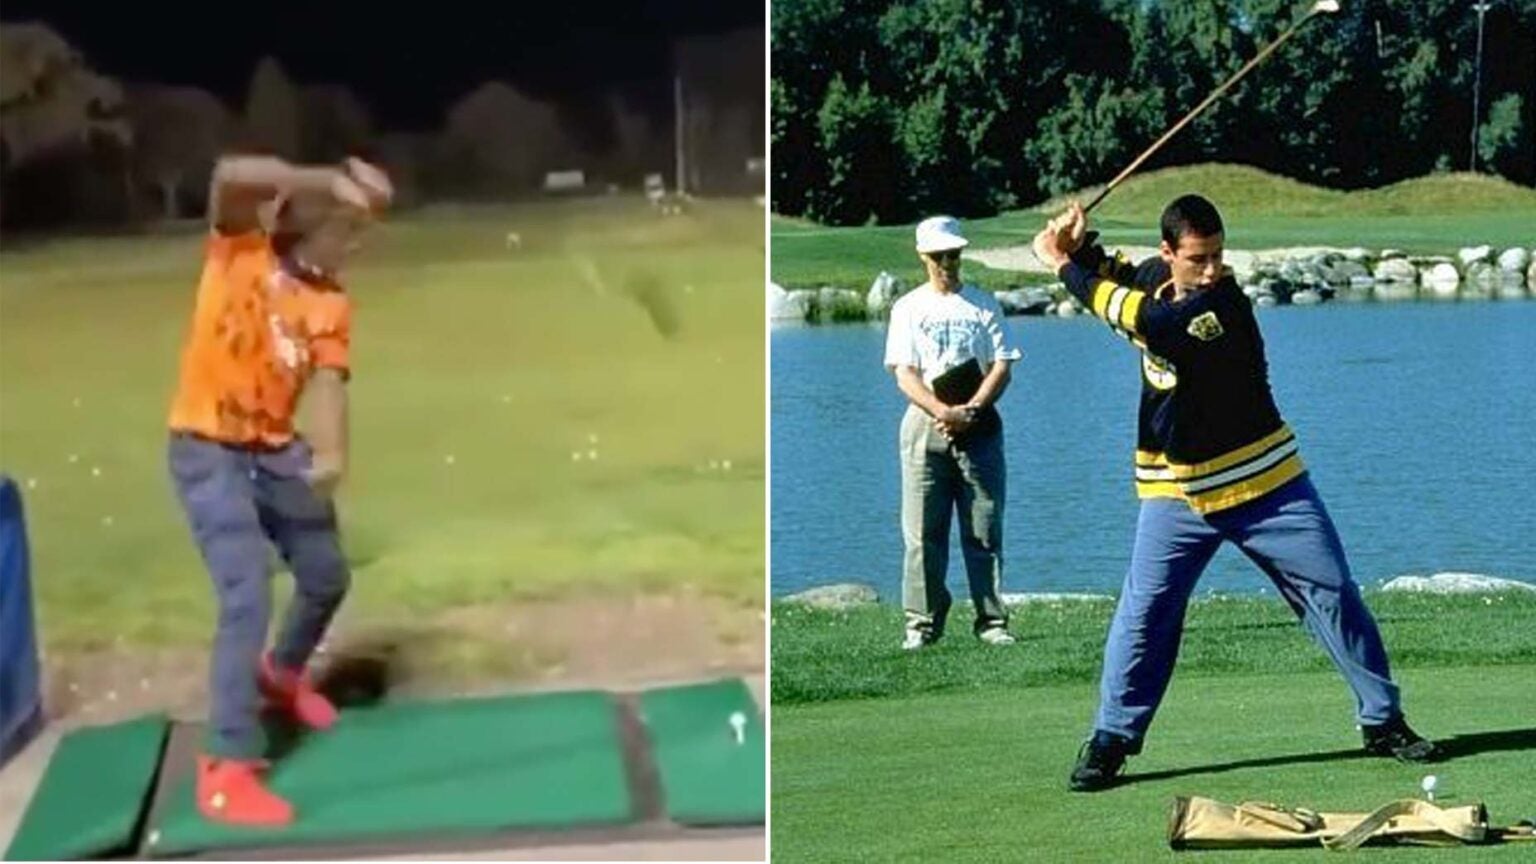 A reallife Happy Gilmore? Experts weigh in on the viral, singlearm swing